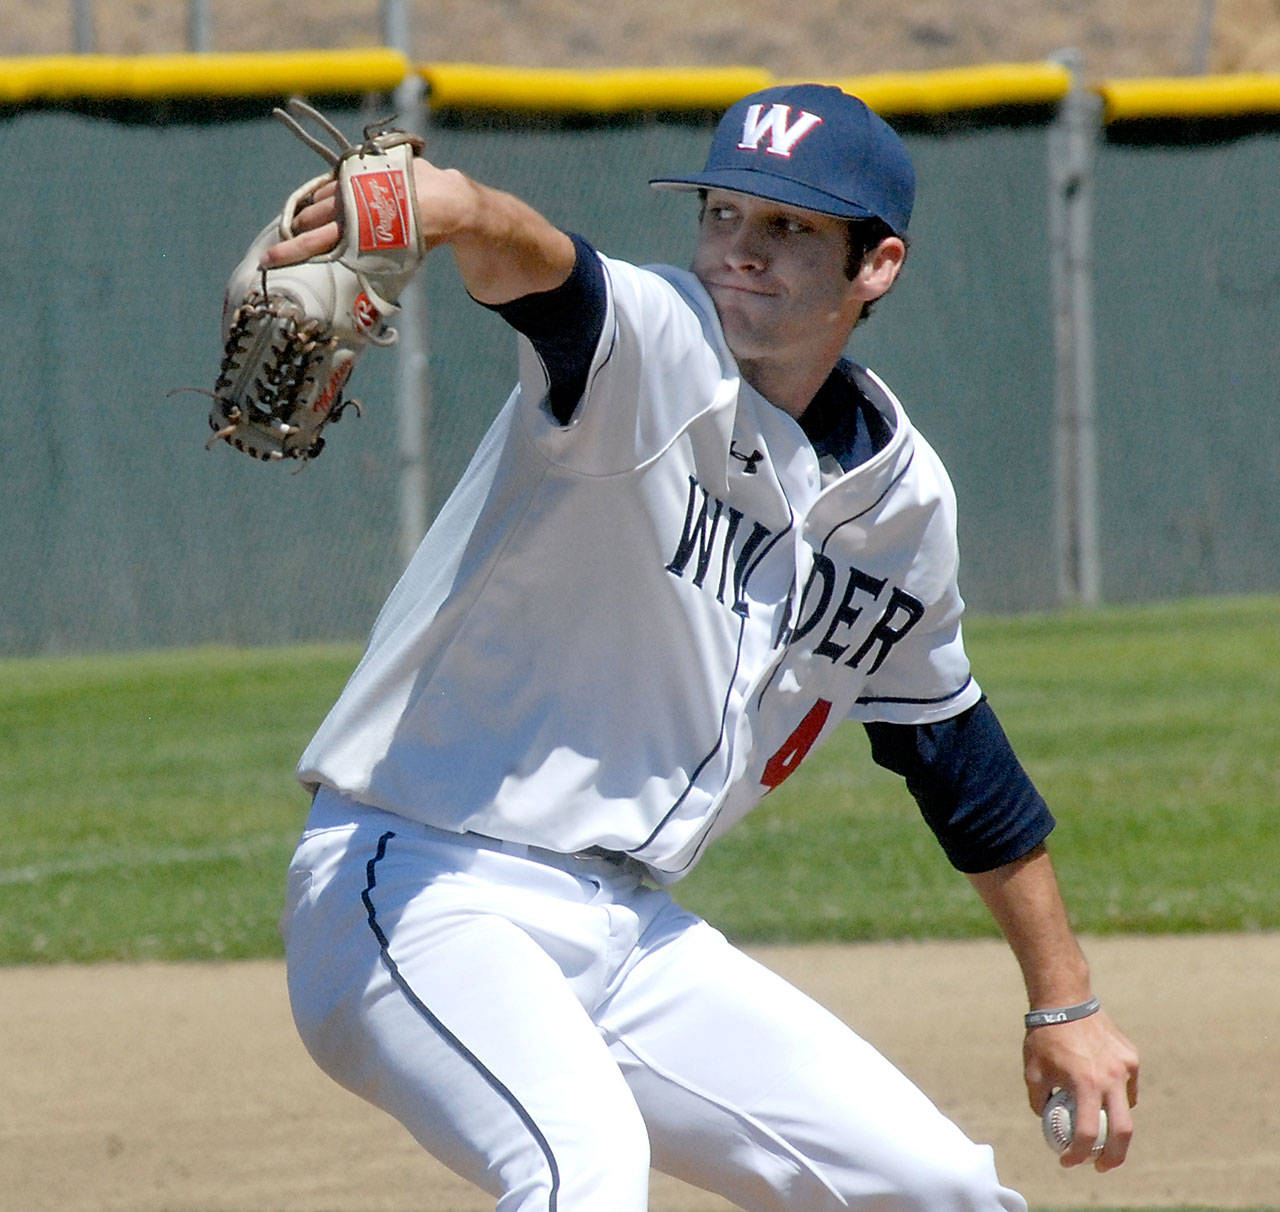 Keith Thorpe/Peninsula Daily News Wilder Senior pitcher Ian Miller throws in a July 14 game against the Skagit Sox. Miller threw a no-hitter for Wilder at the American Legion AAA State Tournamant on Saturday.